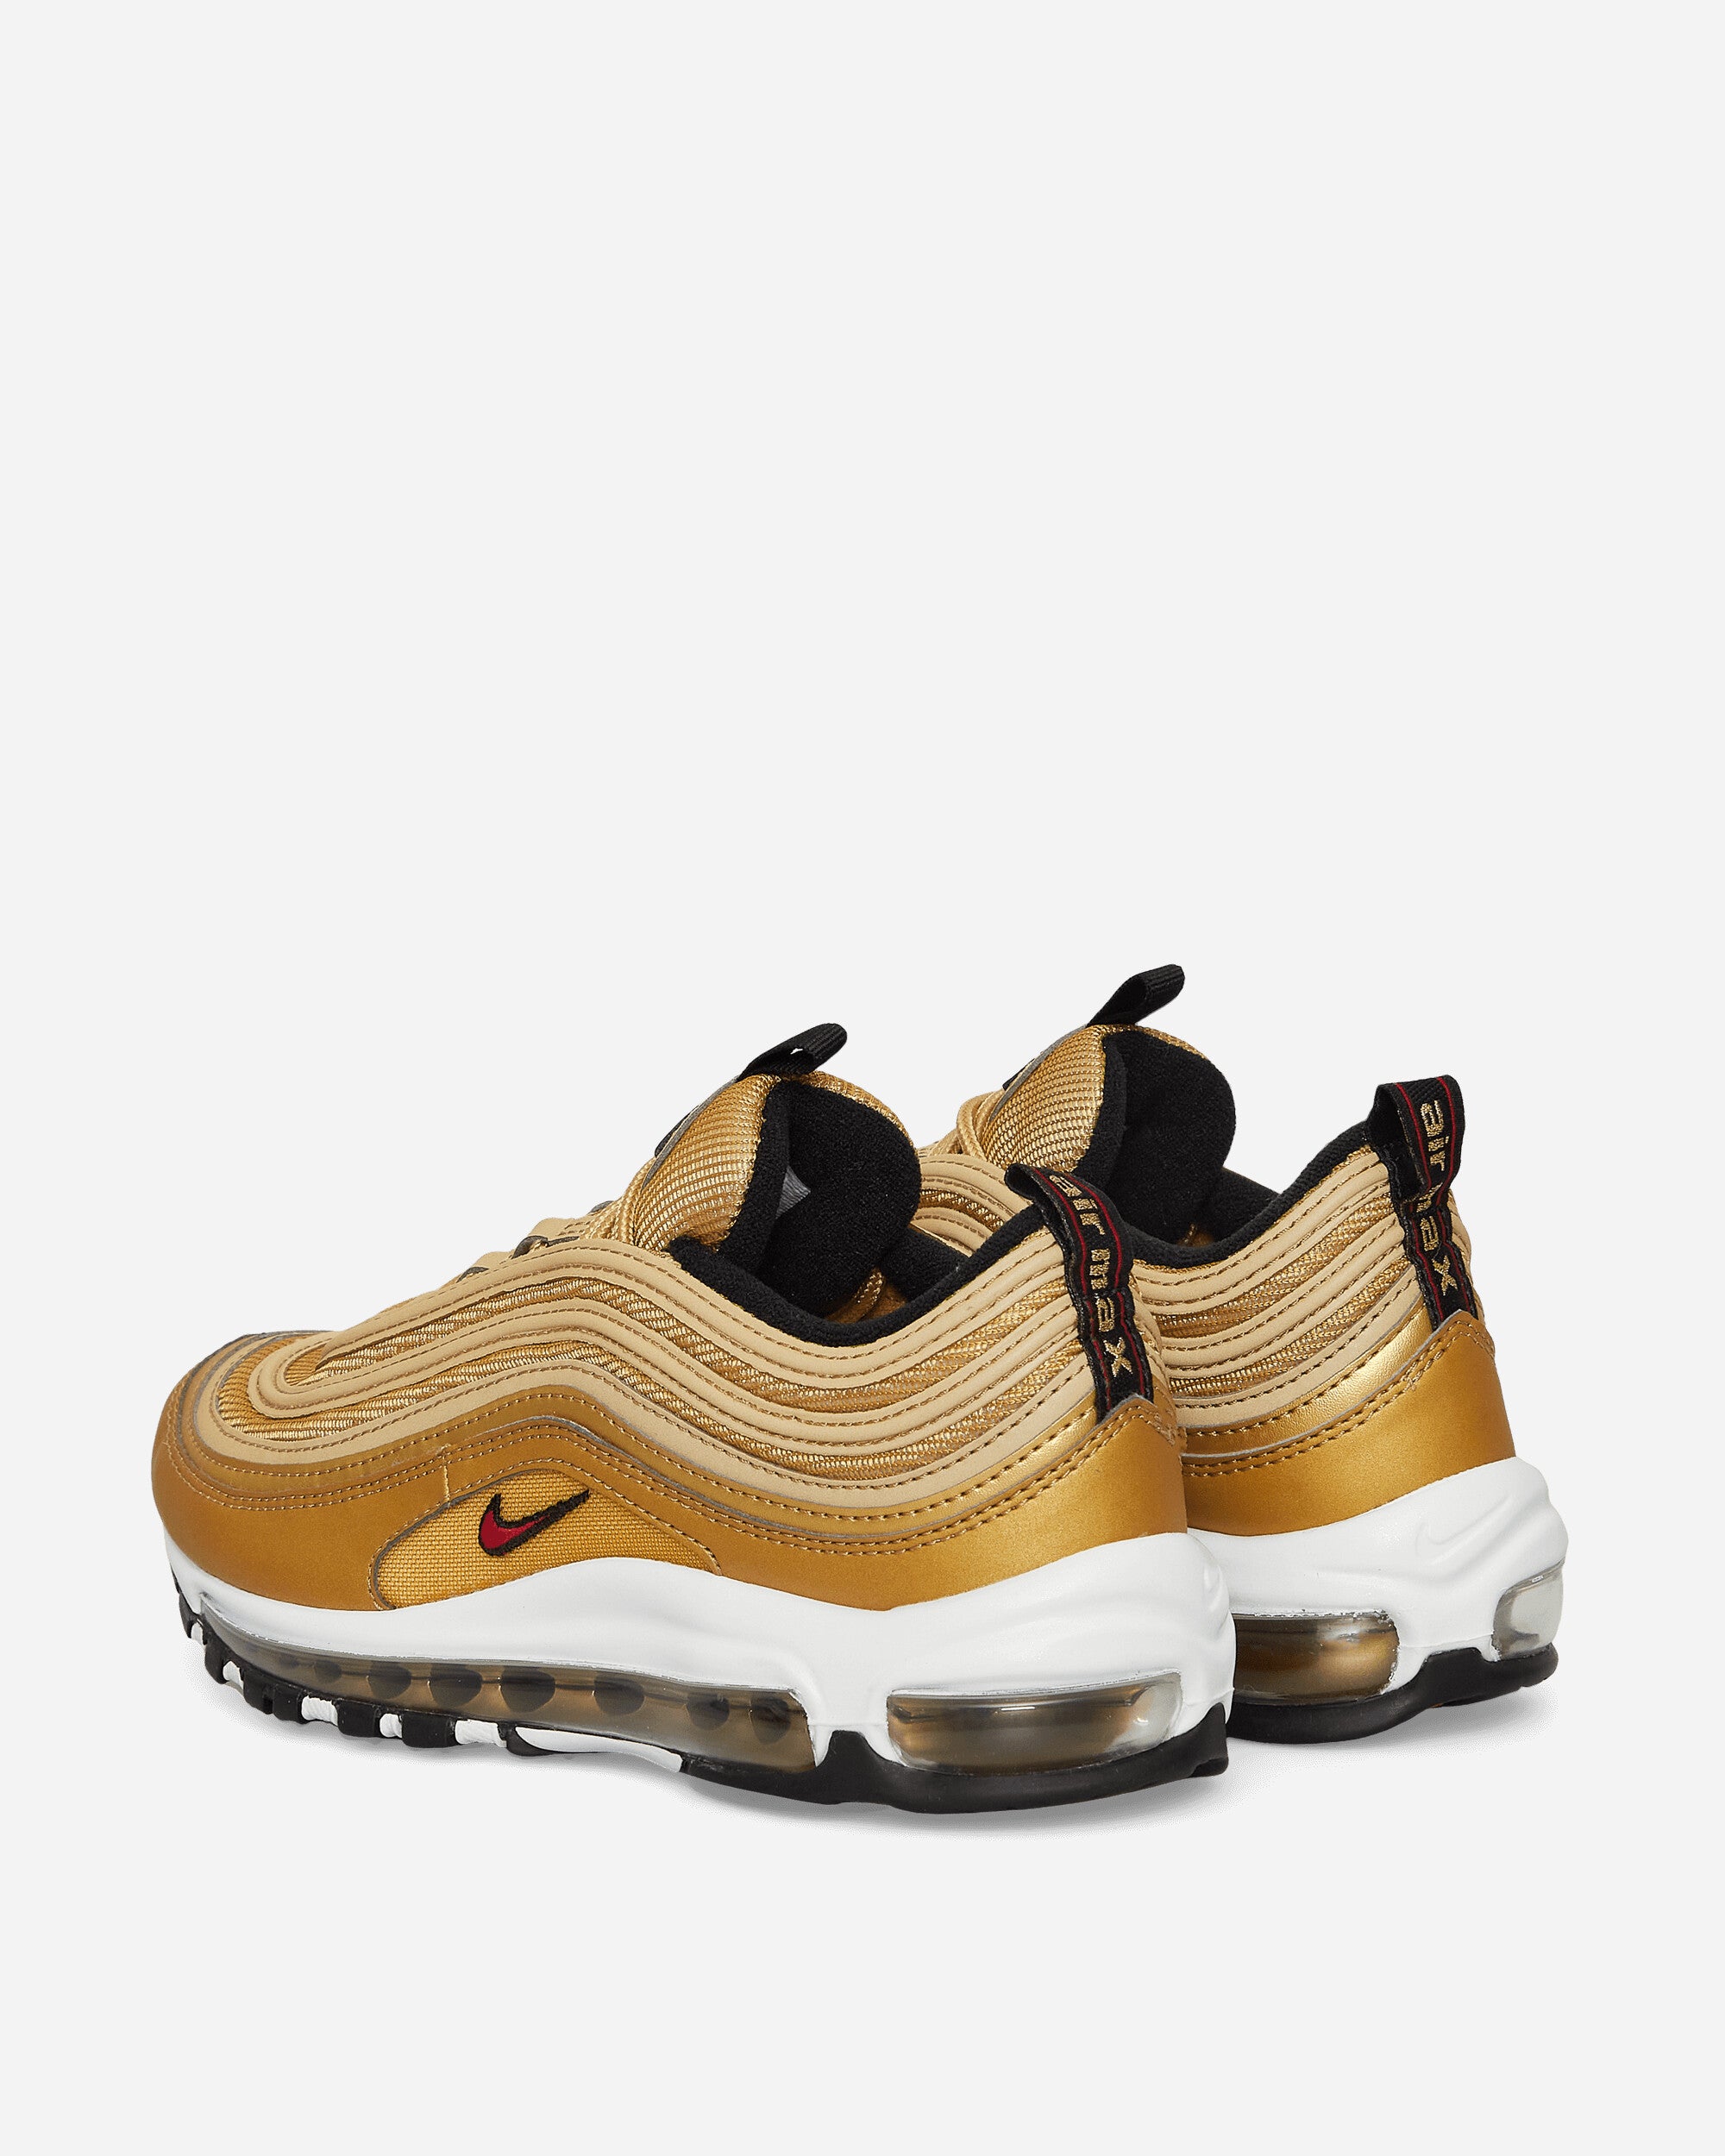 Nike Wmns Air Max 97 Og Metallic Gold/Varsity Red Sneakers Low DQ9131-700